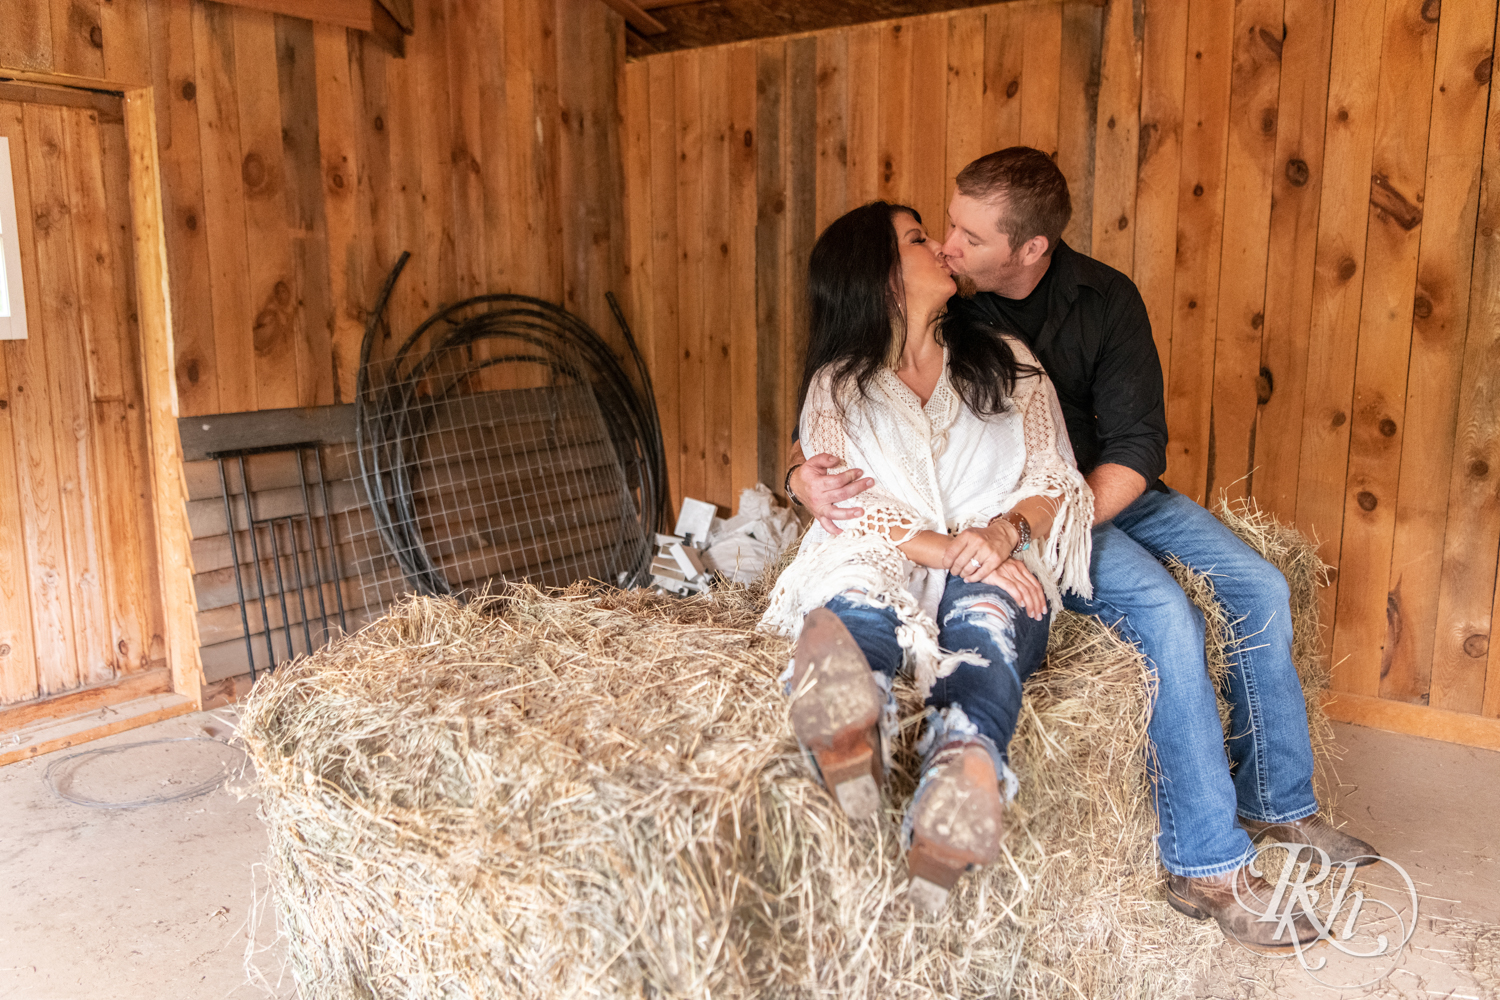 Lebanese woman and man kiss in hay bale at their horse farm in Chisago City, Minnesota.